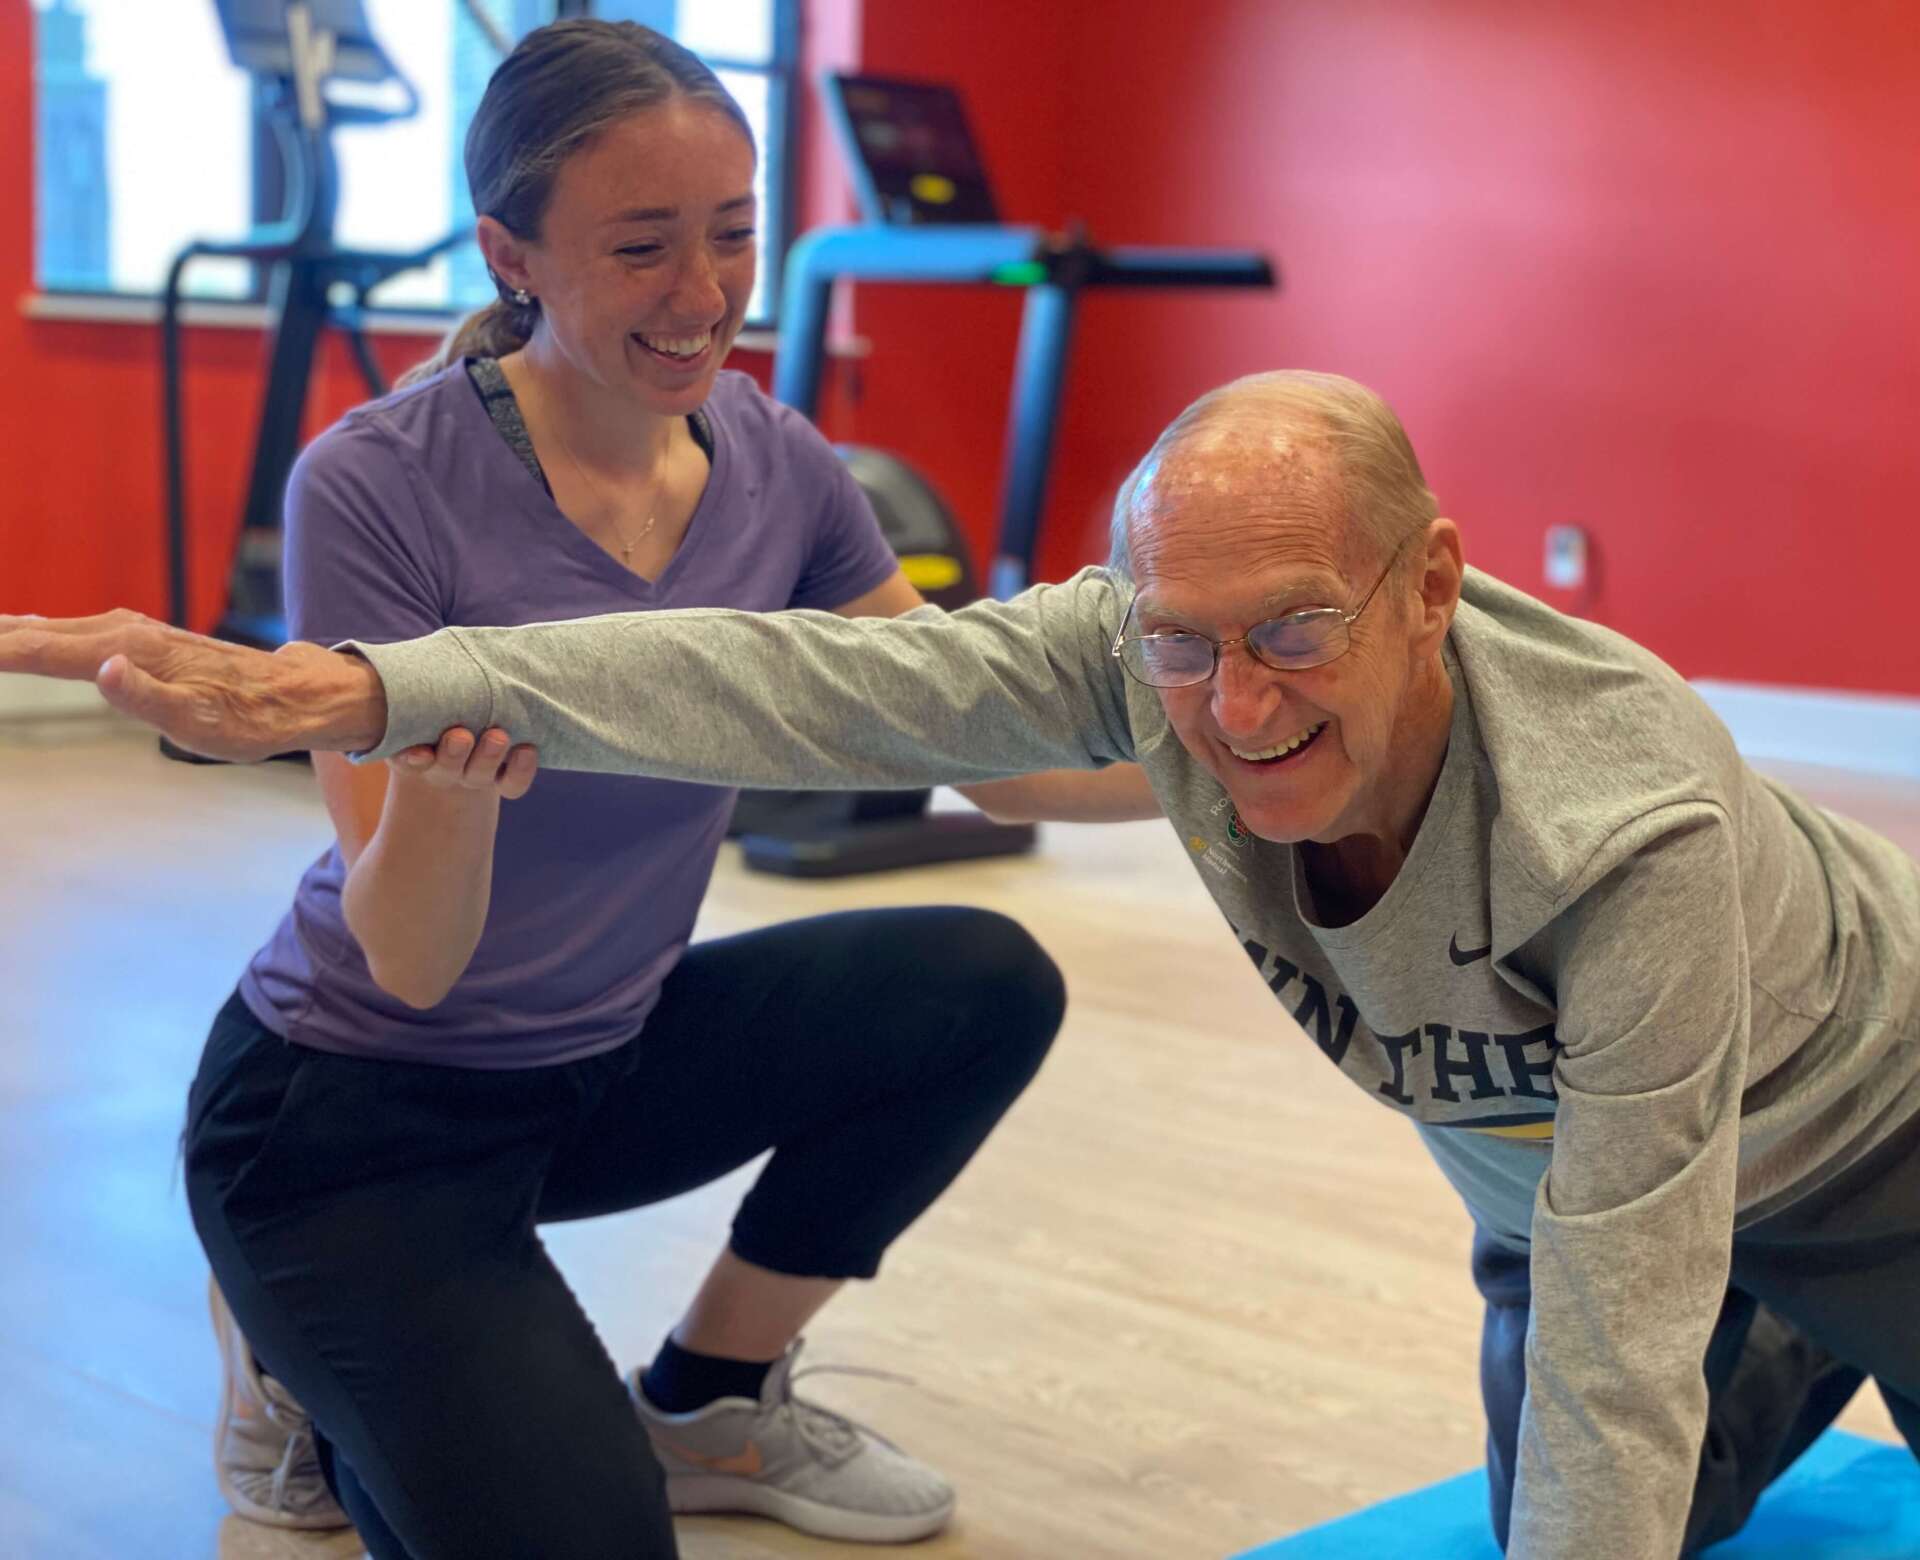 personal trainer working alongside older man stretching his arm while on the ground